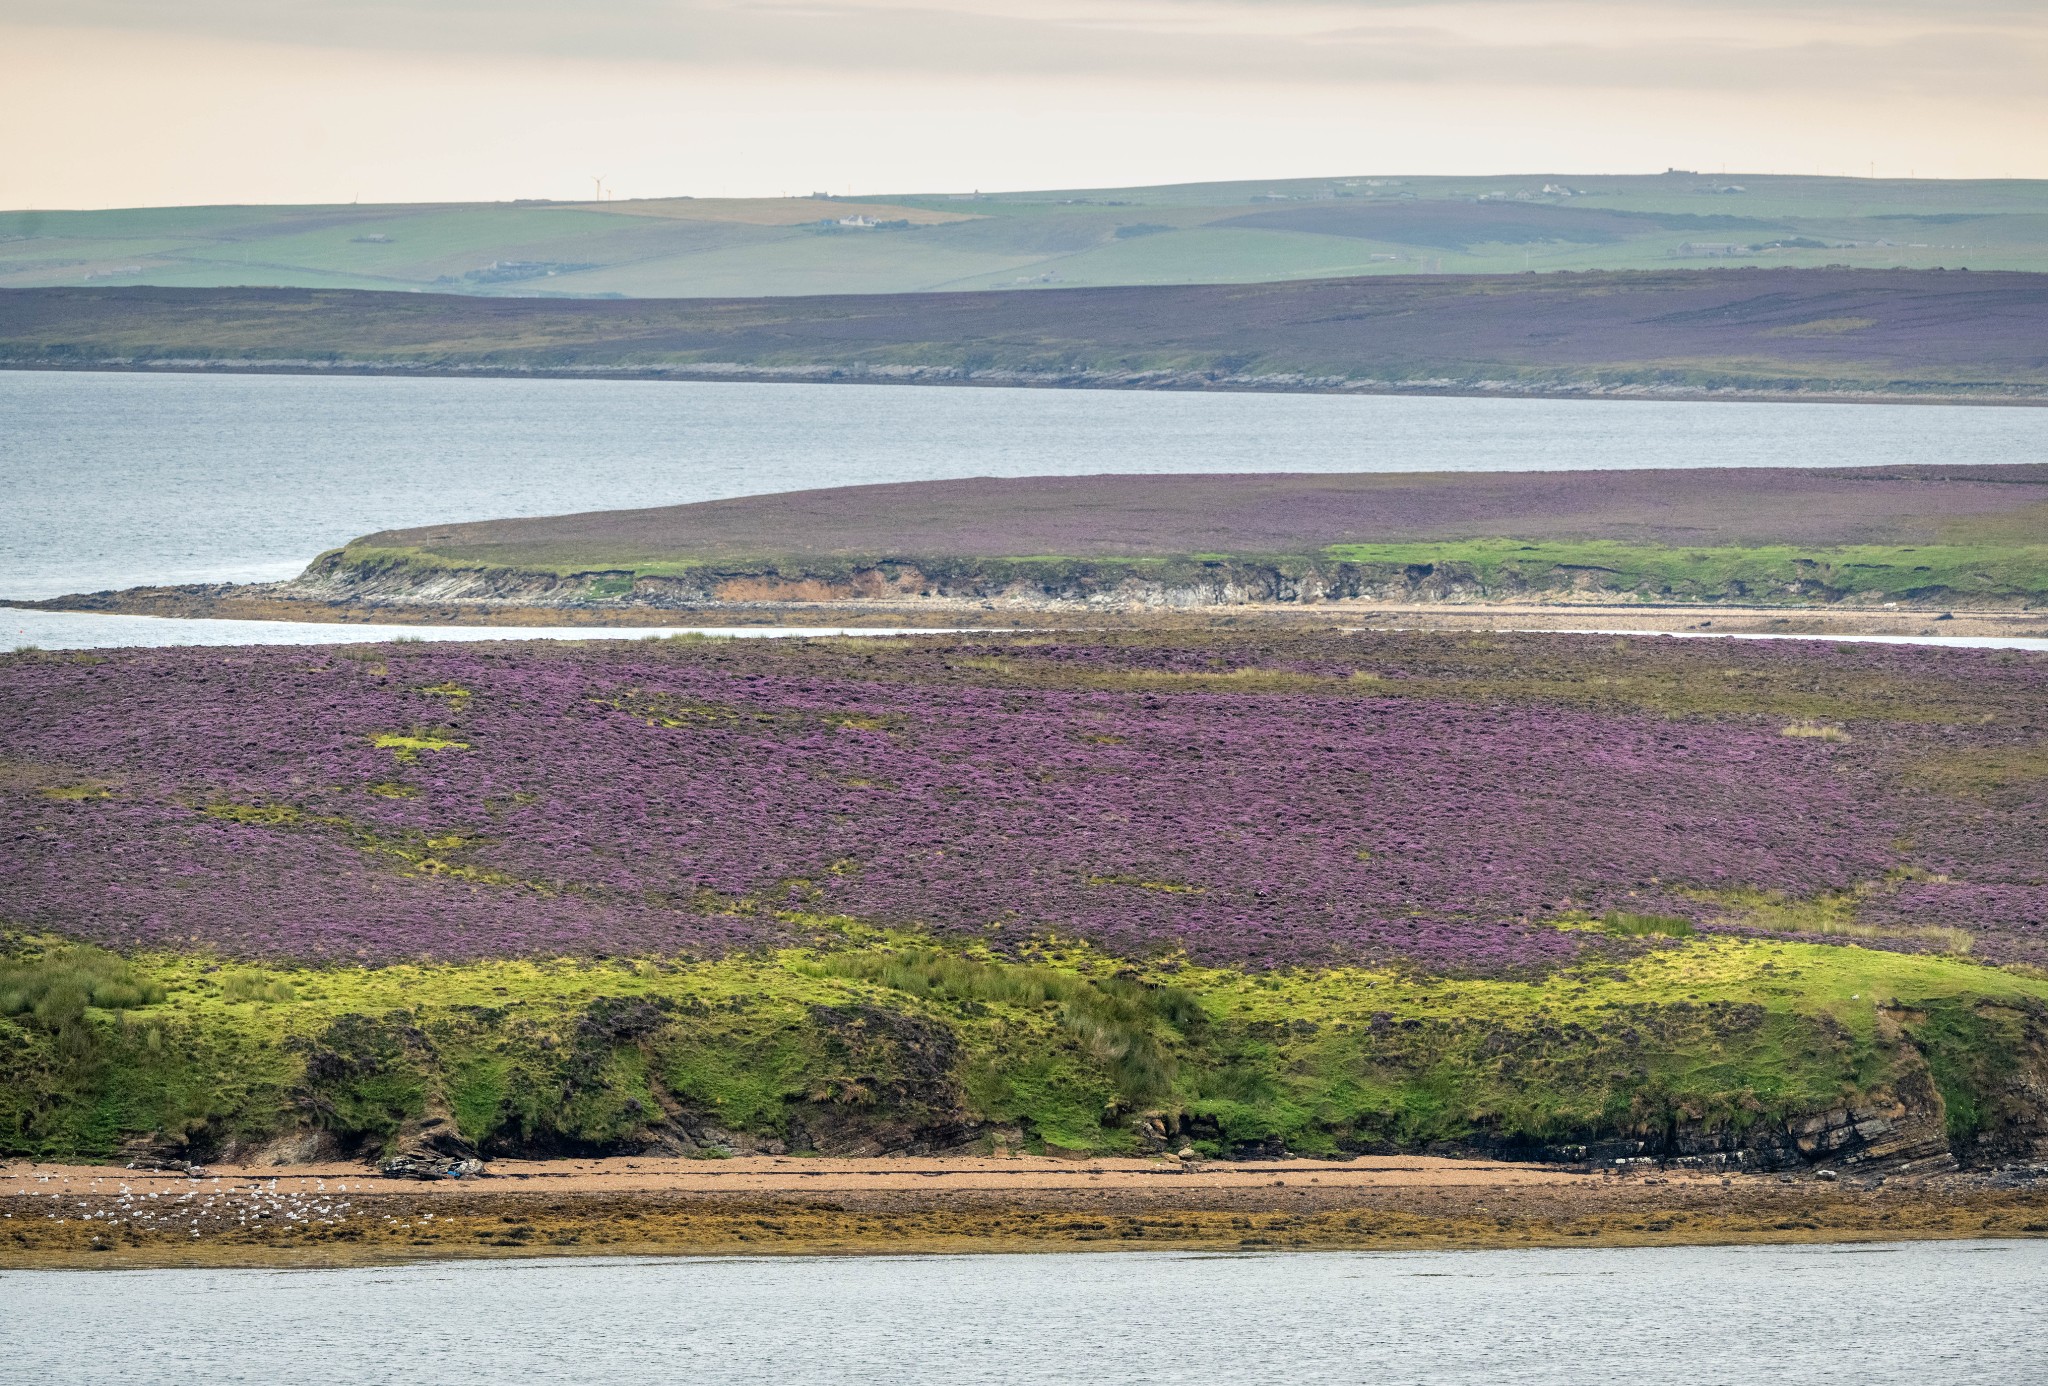 View over Rysa Little in Orkney - image by Raymond Besant